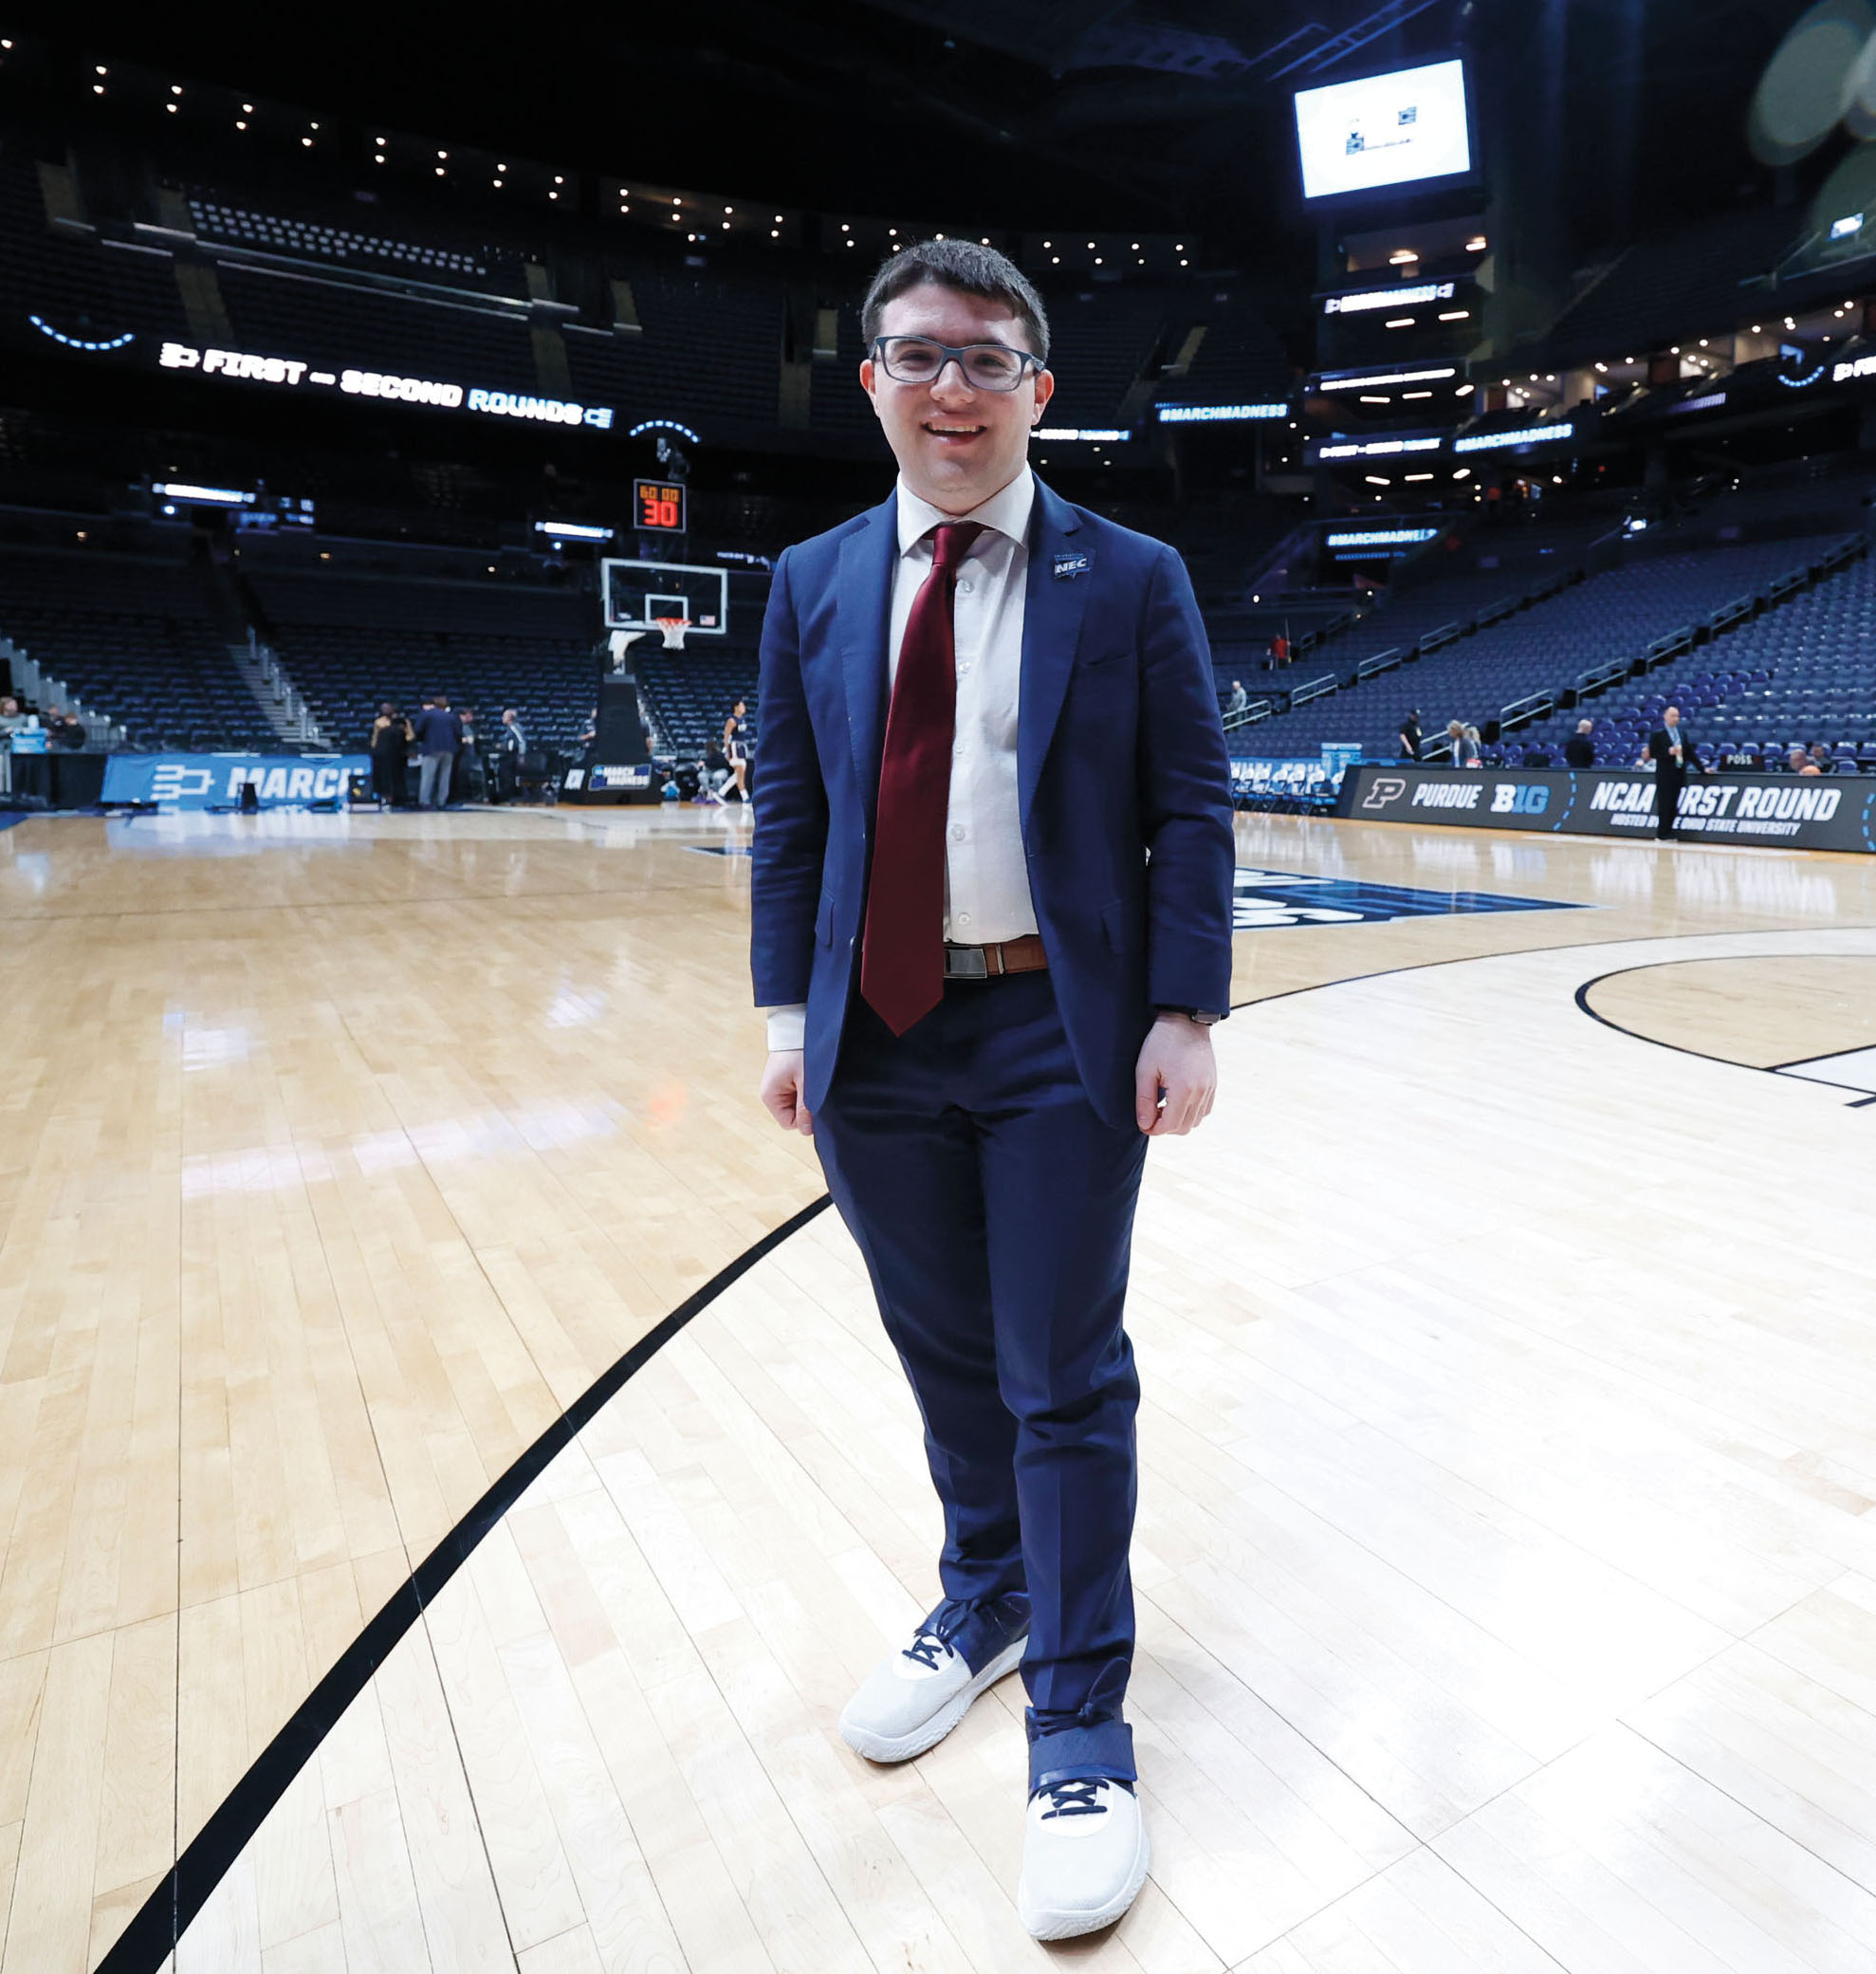 A young man in glasses, a suit and tie, stands in the middle of an empty basketball court in an arena.